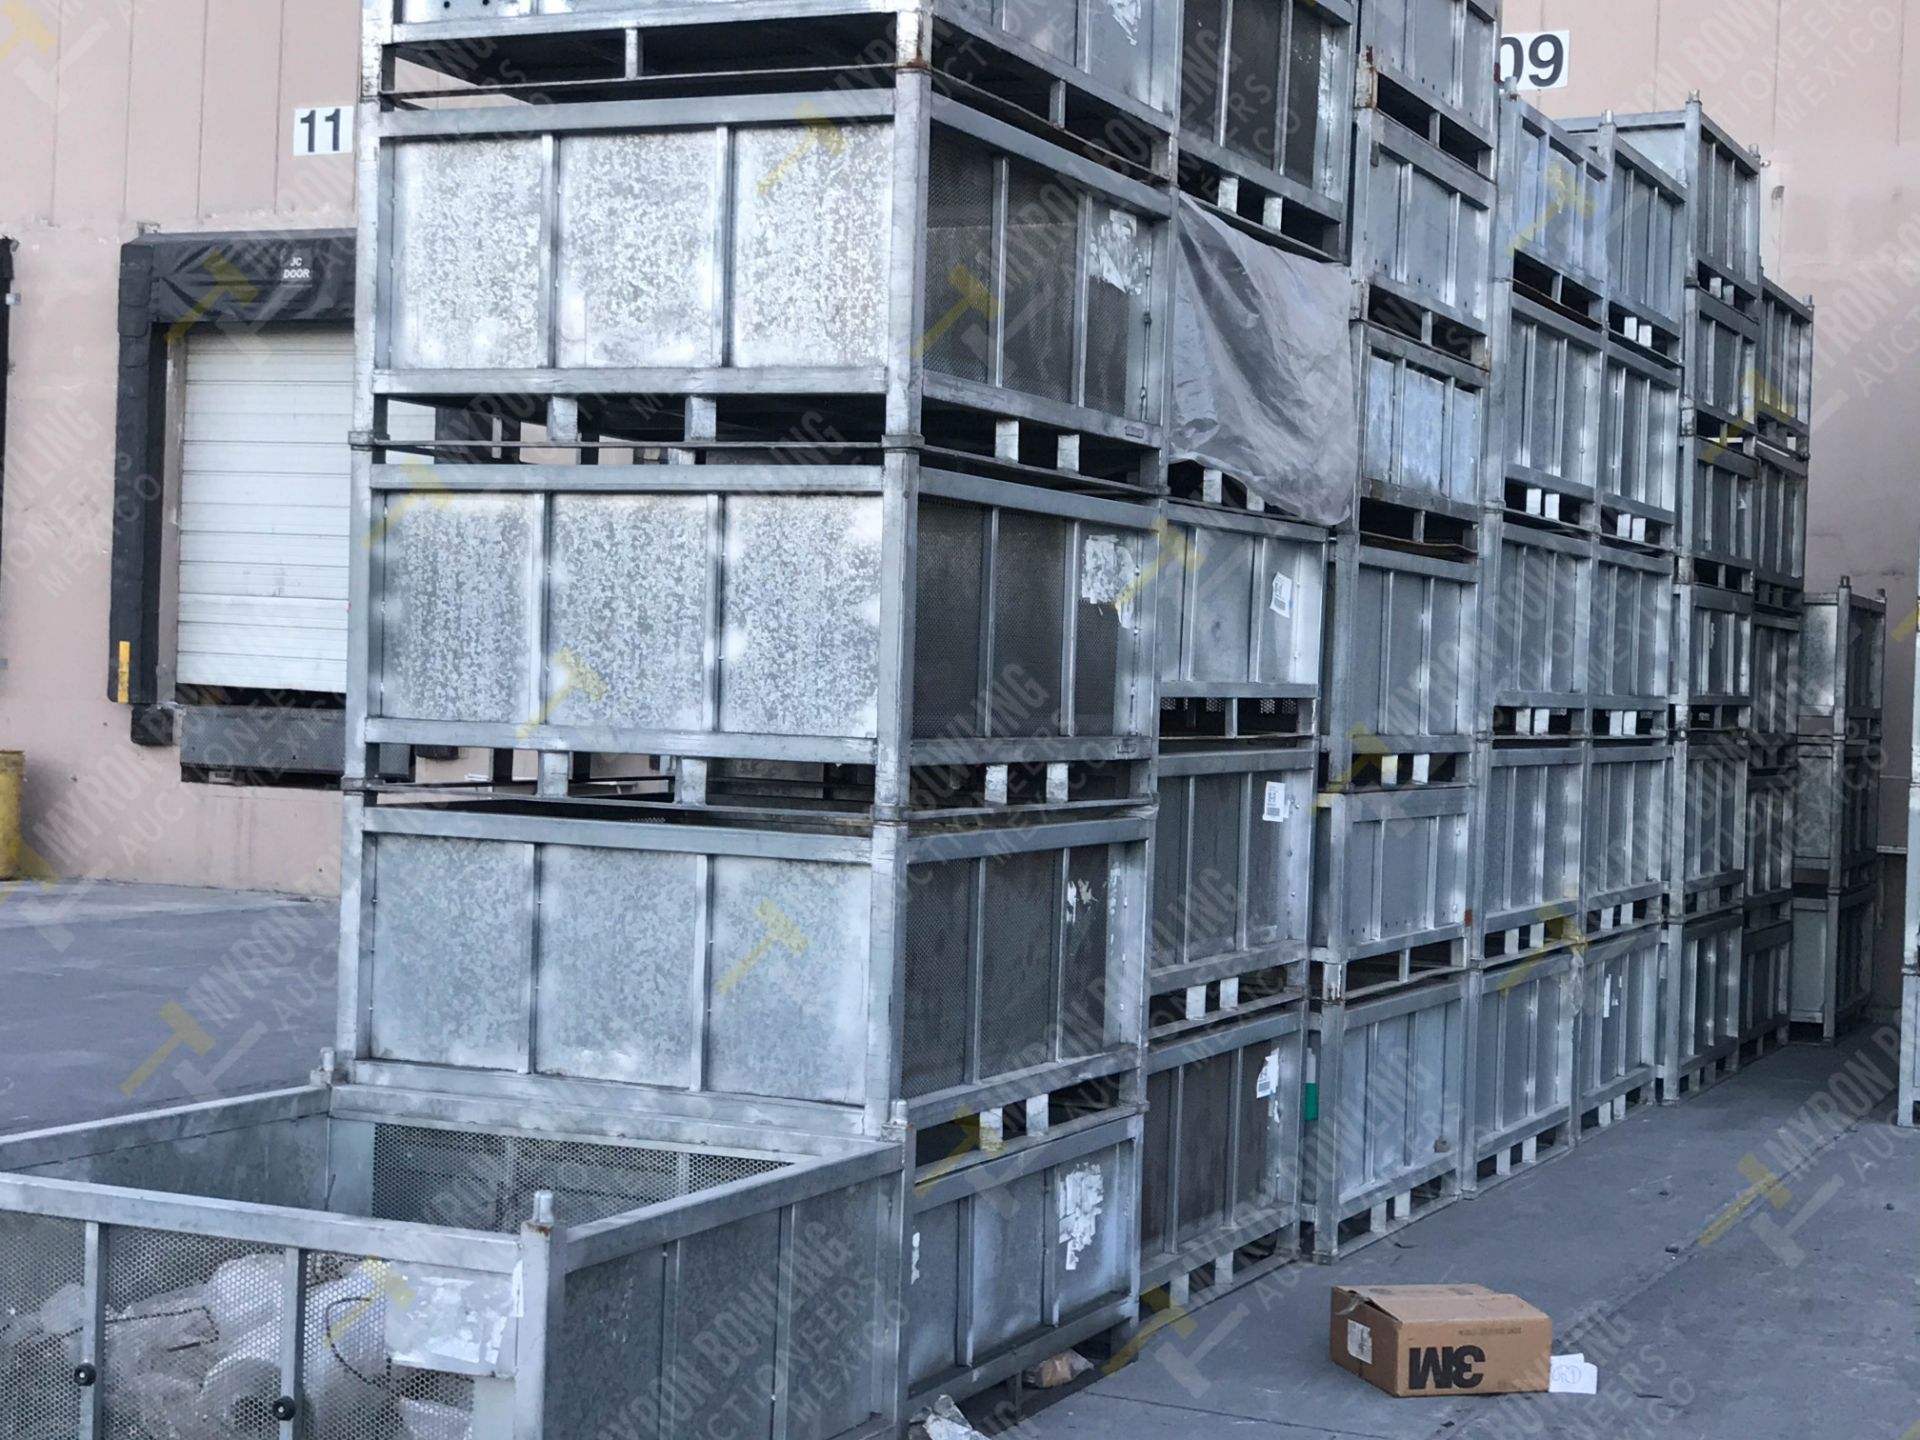 70 GALVANIZED STEEL CONTAINERS XYTEC (DIMENSIONS 0.60x1.32x1.24 METERS) - Image 8 of 8